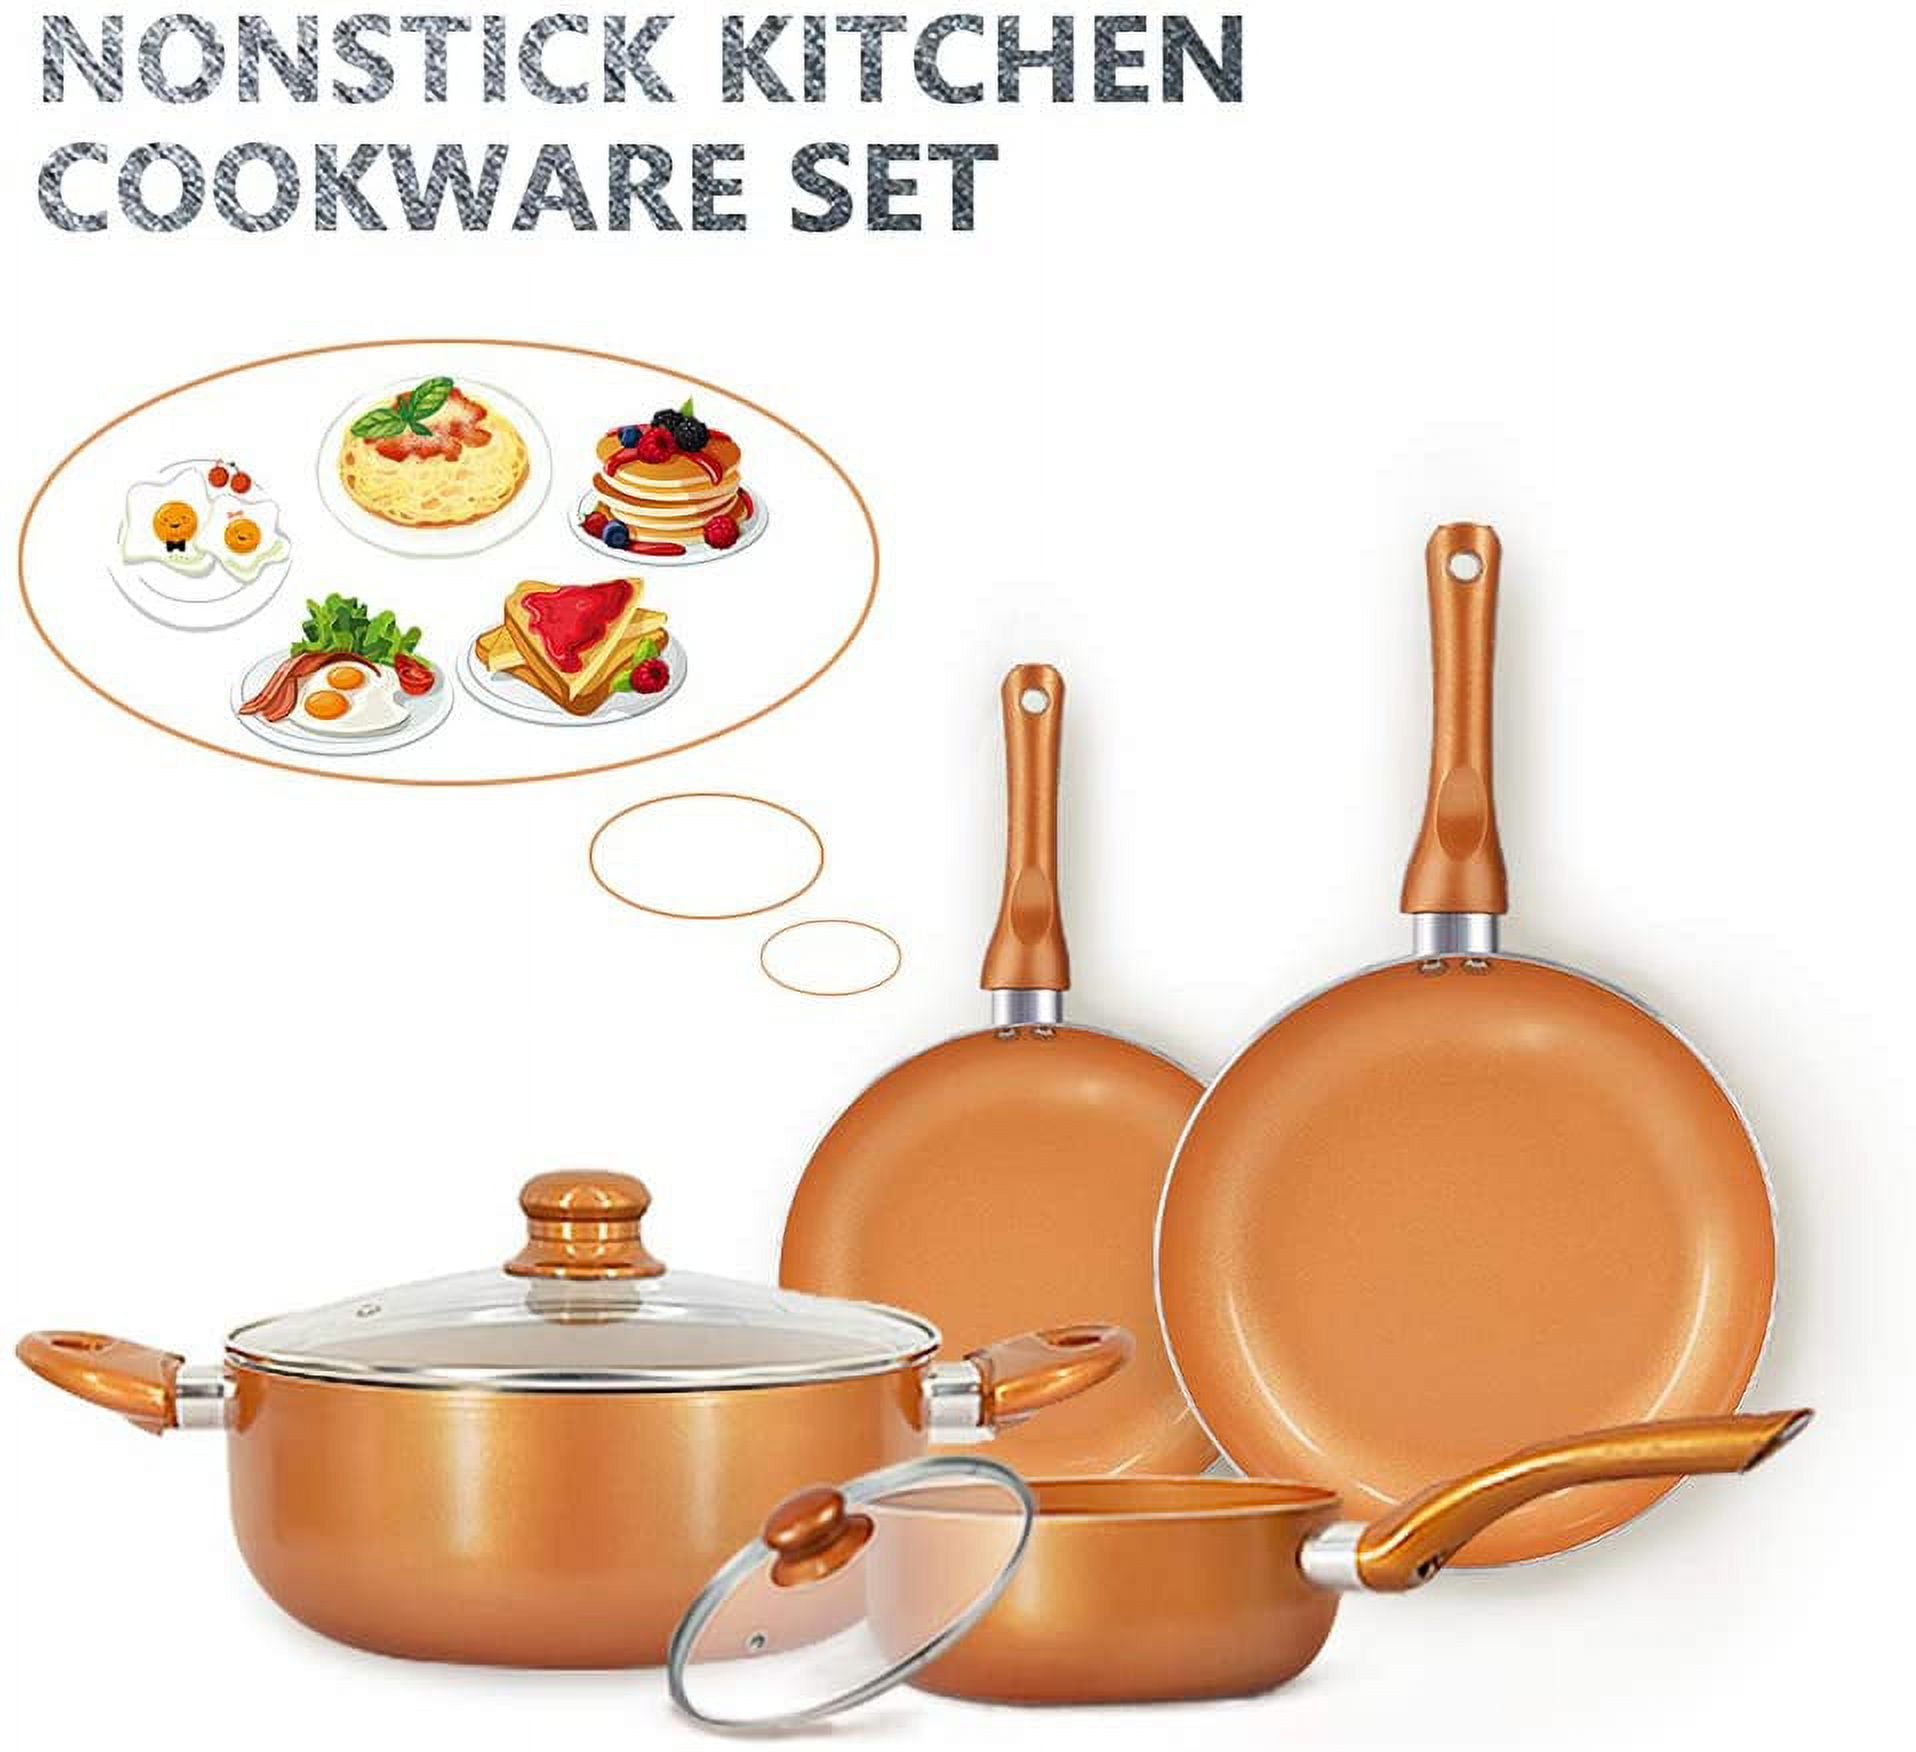 M MELENTA Pots and Pans Set Ultra Nonstick, Pre-Installed 11pcs Cookware  Set Copper with Ceramic Coating, Stay cool handle & Nylon Kitchen Utensils